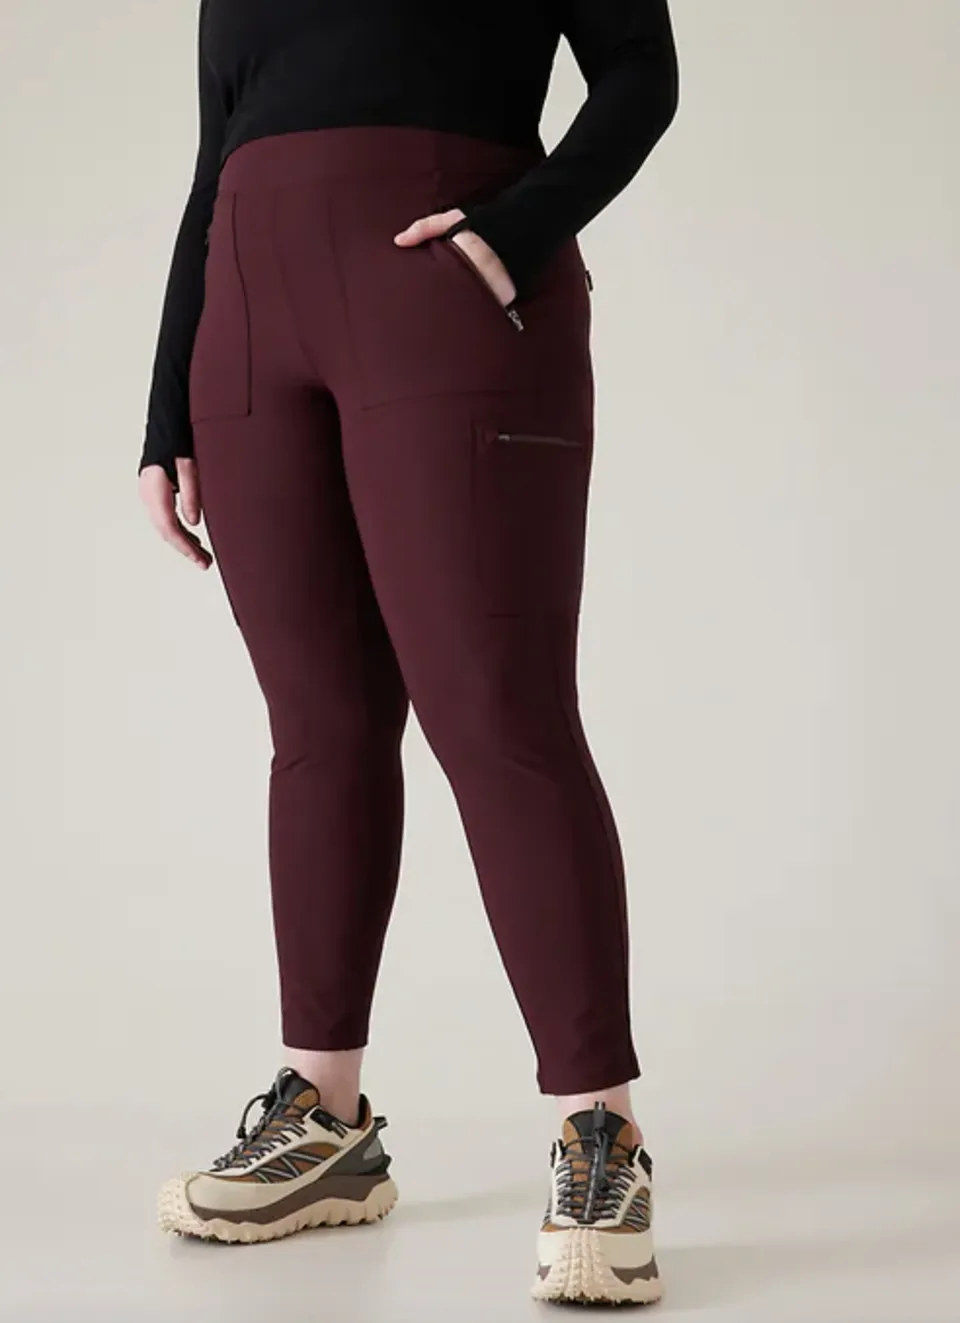 Cozy Winter Leggings That Are Basically Pants